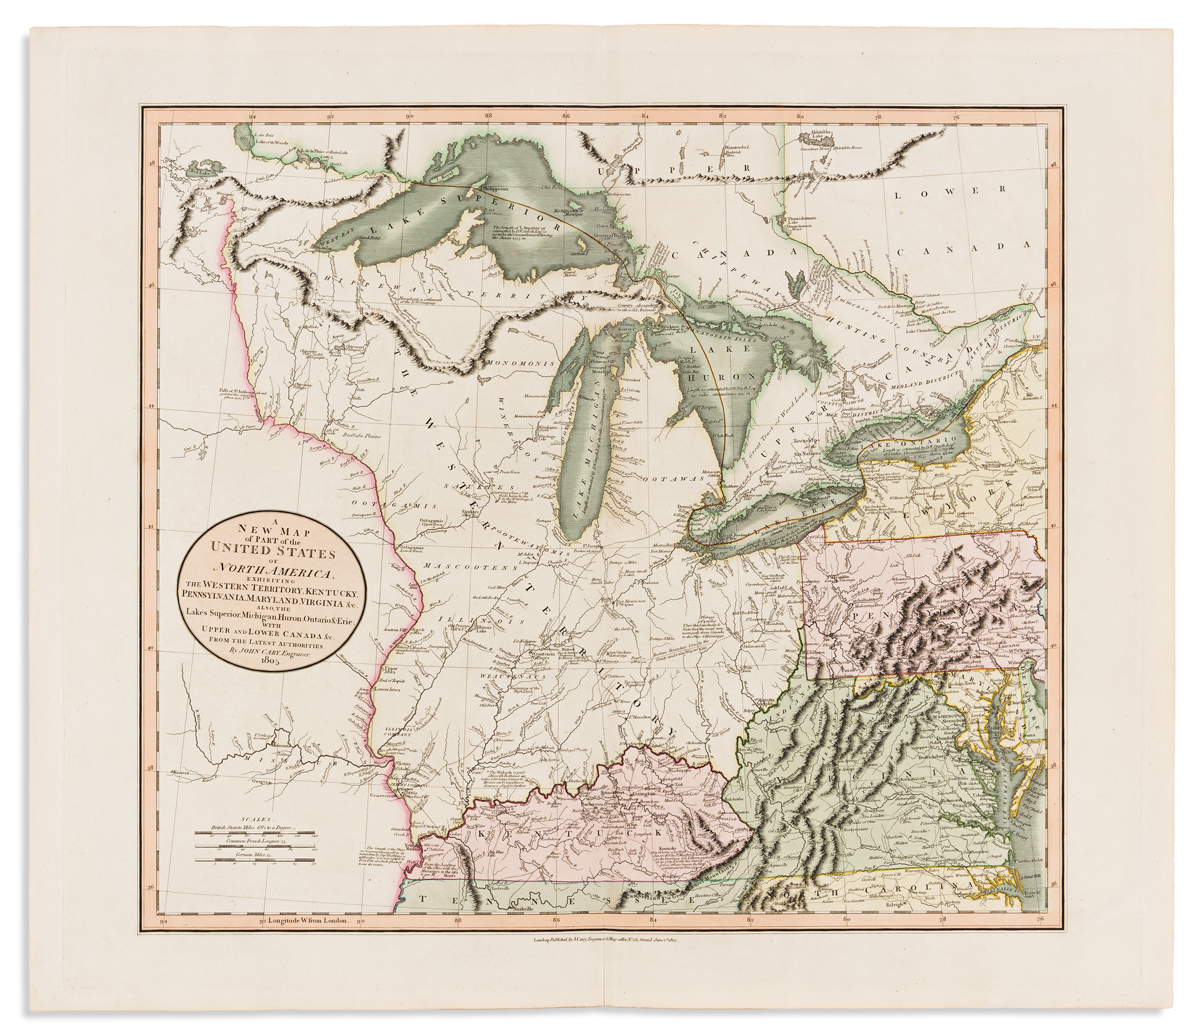 CARY, JOHN. A New Map of Part of the United States of North America, Exhibiting the Western Territory,